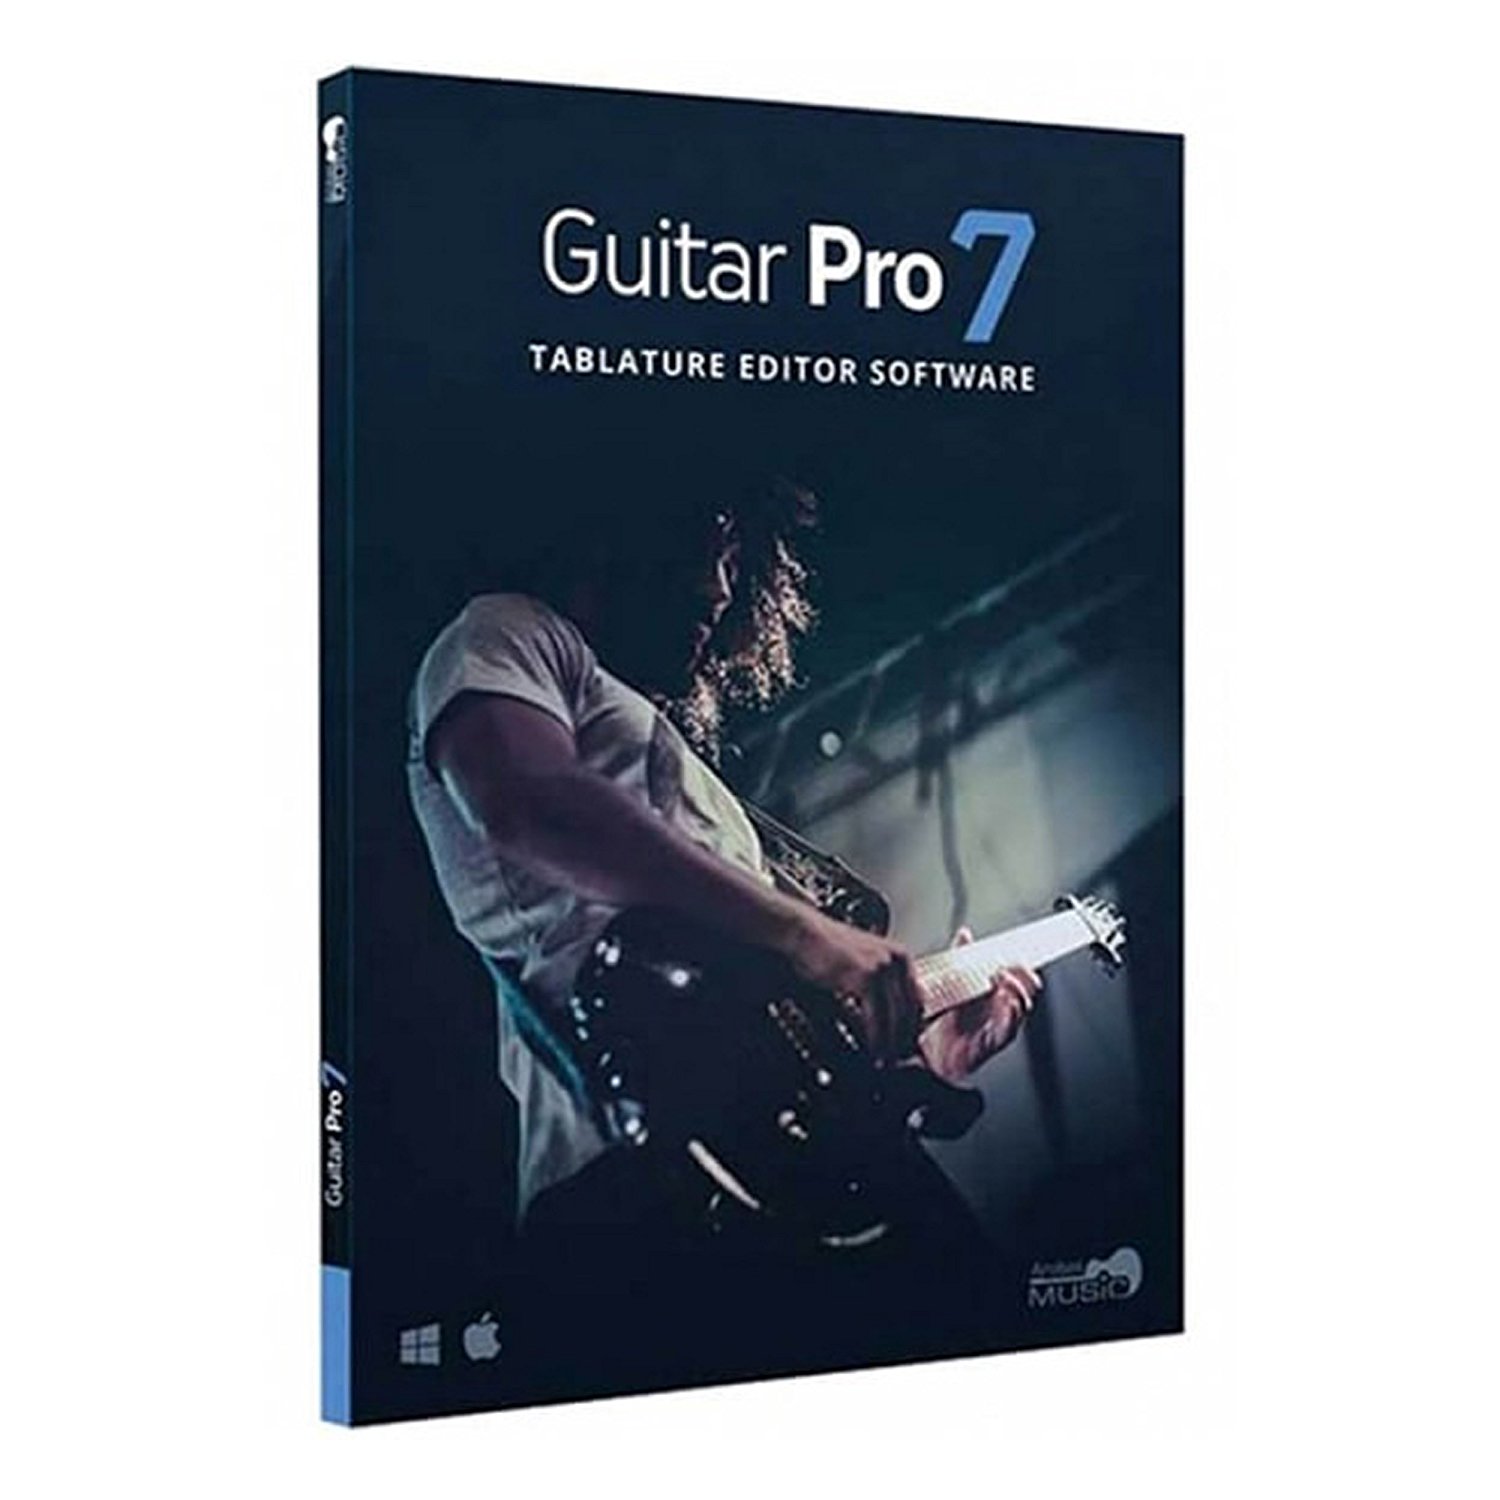 Guitar Pro: a tablature editor, a score player, and a backing band all in one